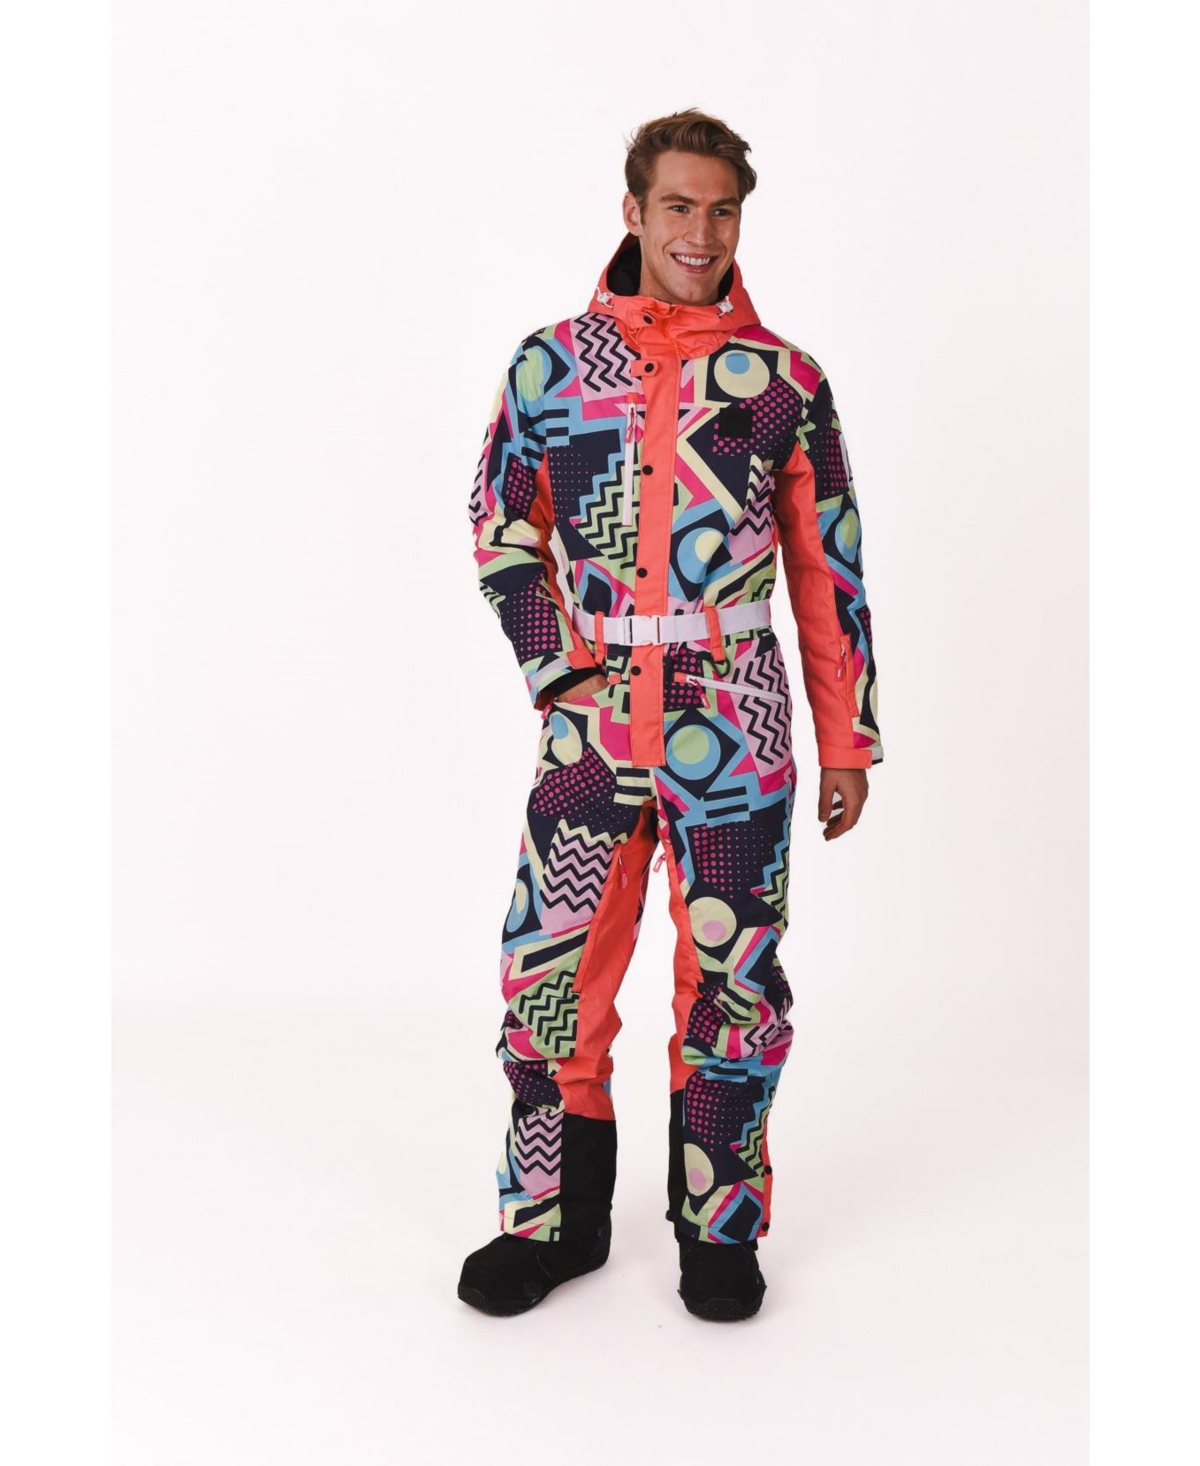 Saved by The Bell Men's Ski Suit - Multi